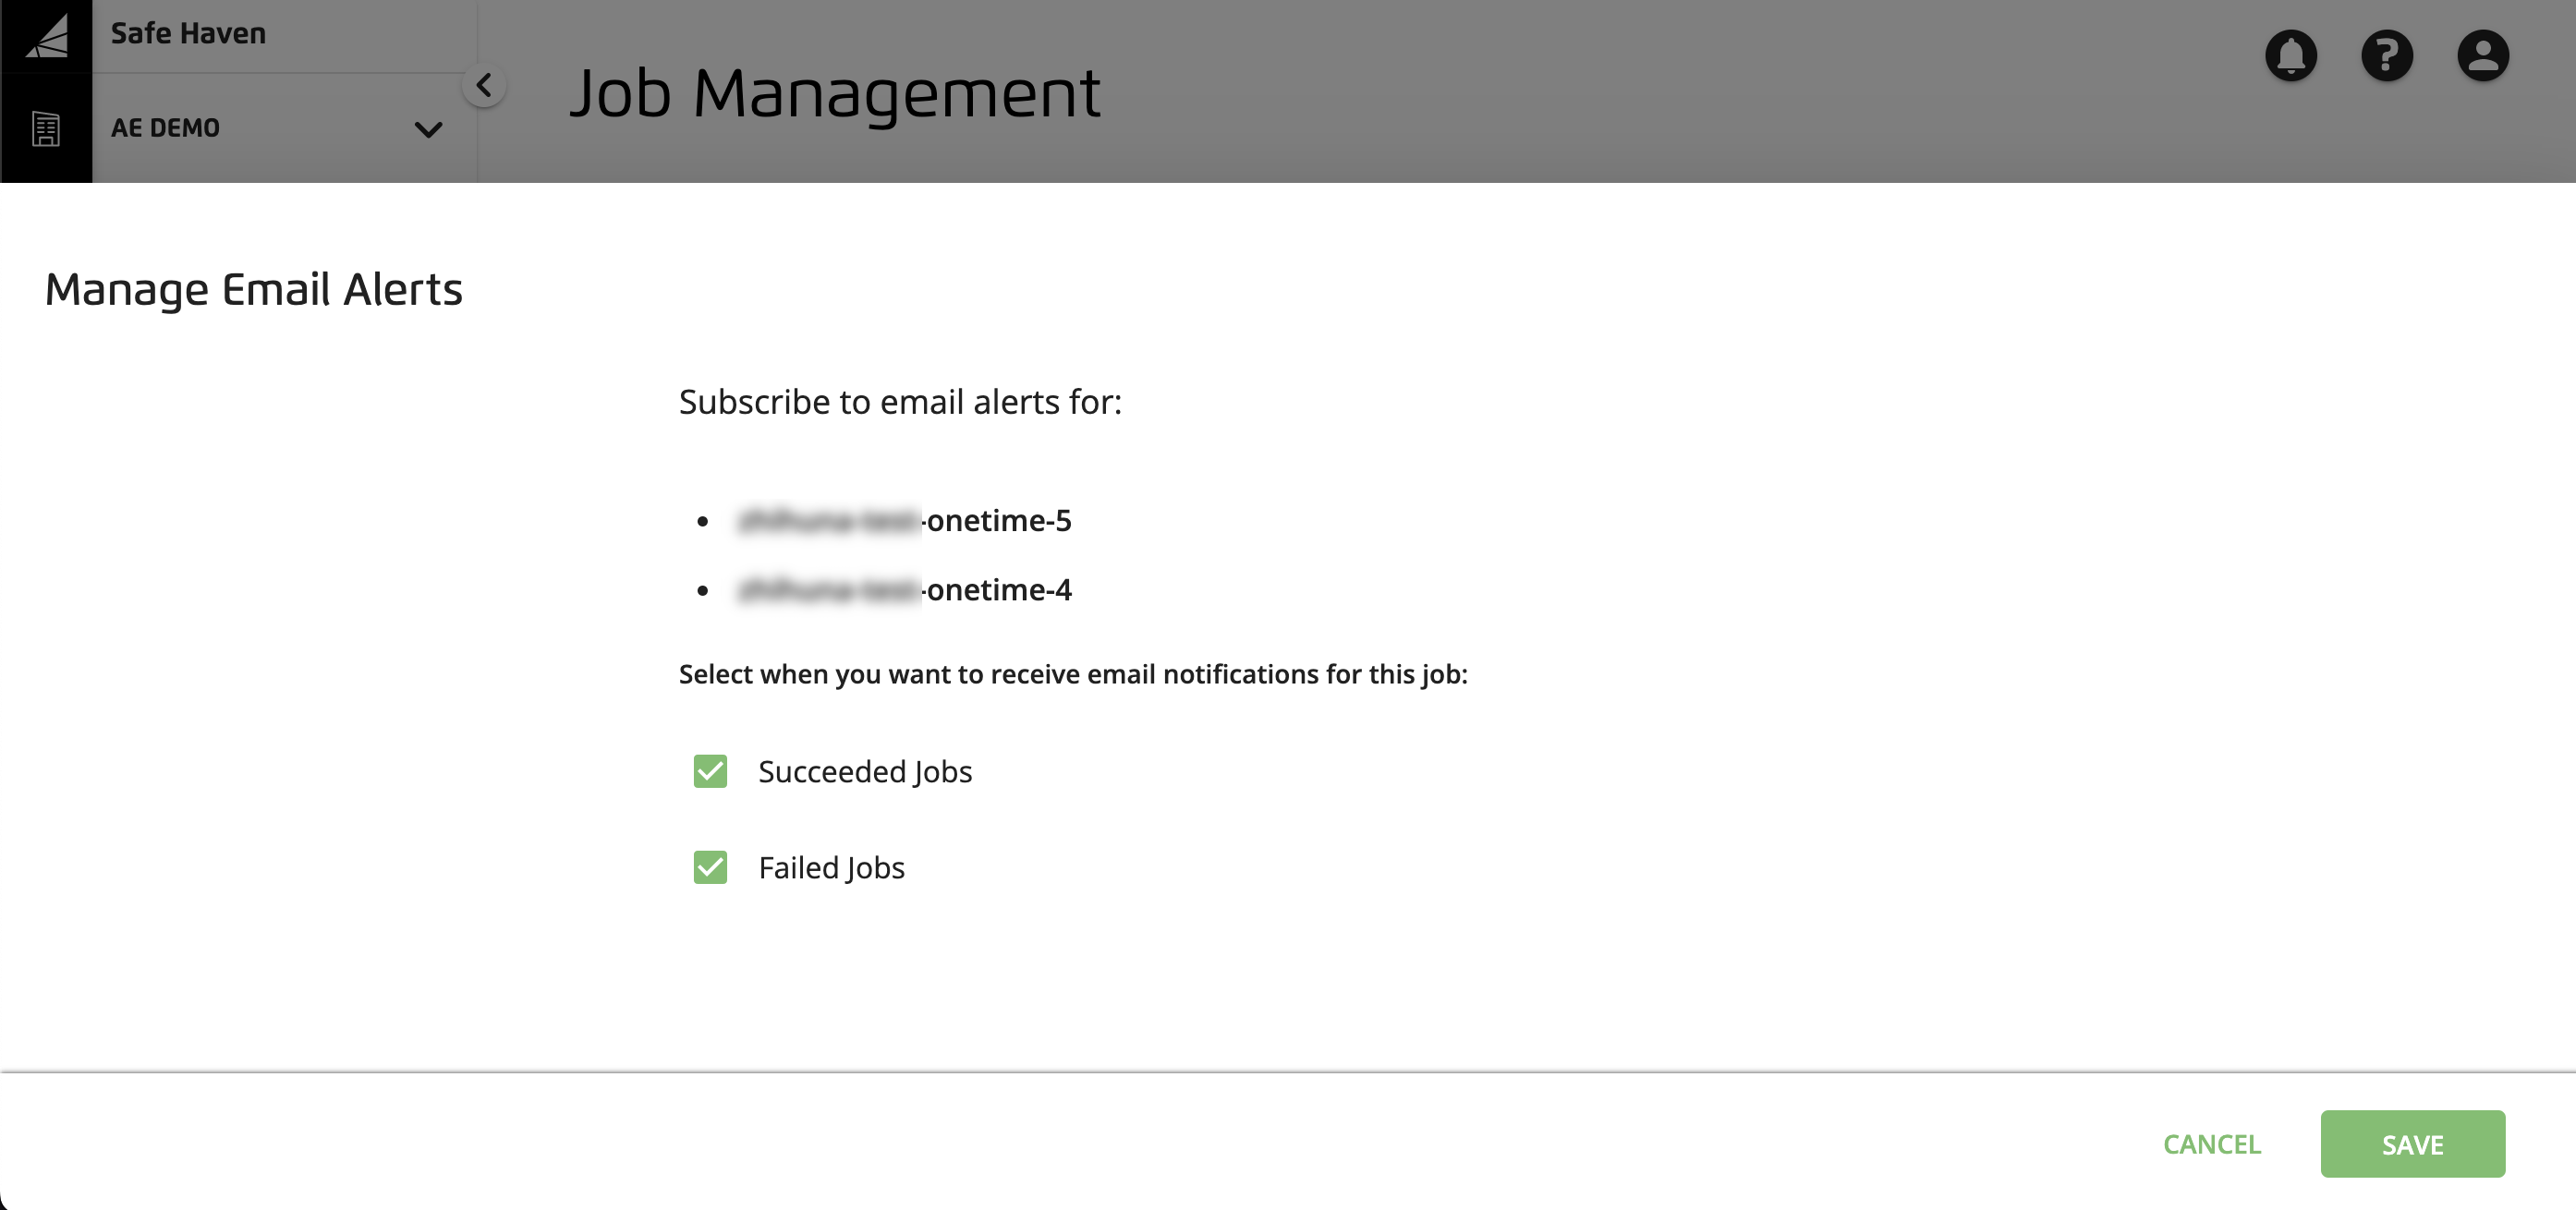 AE-Job_Management-Manage_Email_Alerts_Page.png